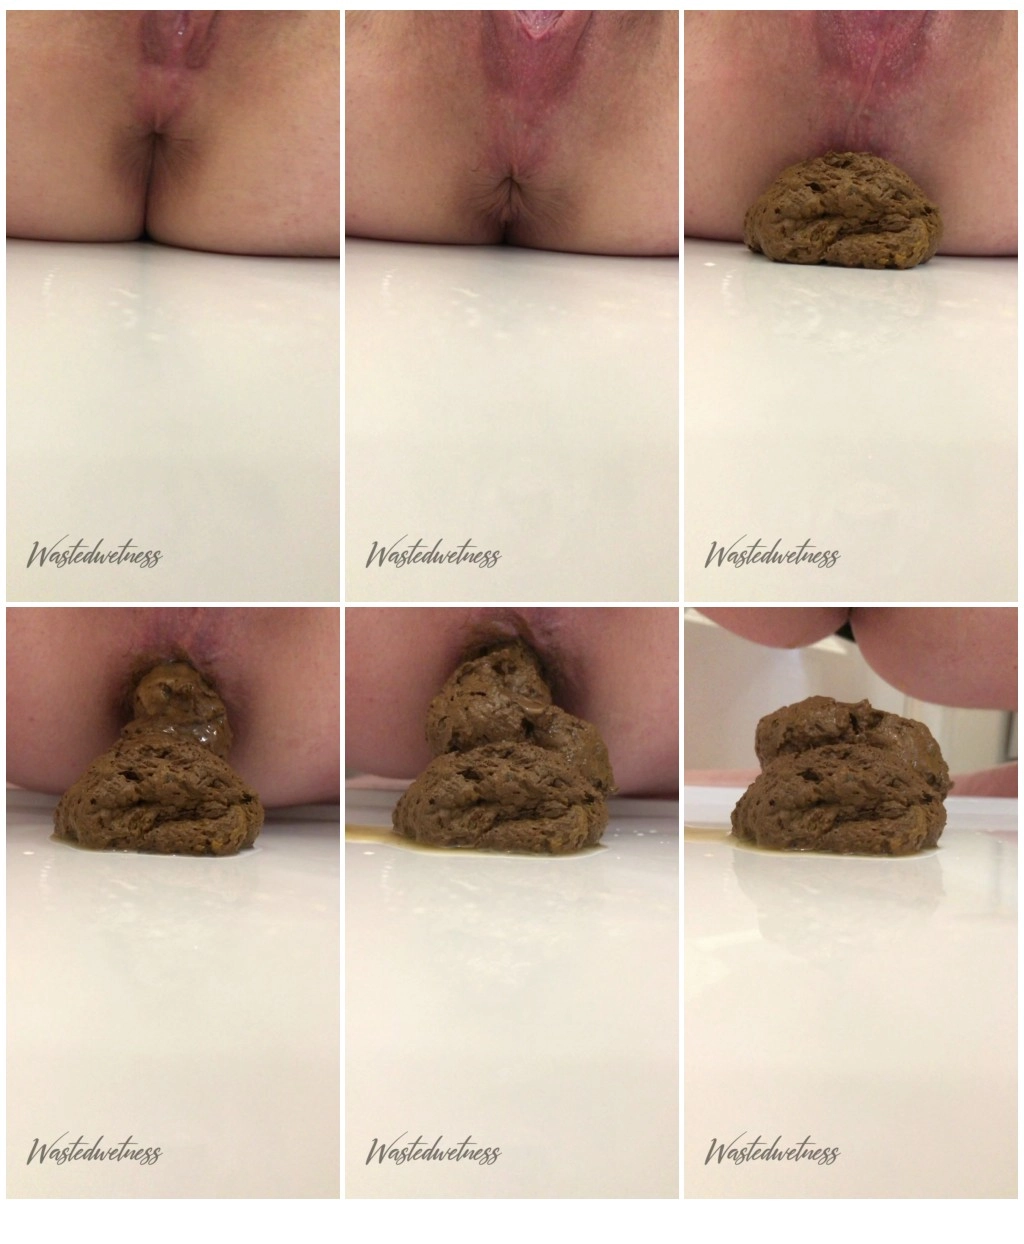 Chocolate Mousse Anyone [Scat solo, shit,  Pissing,  Dirty Ass]